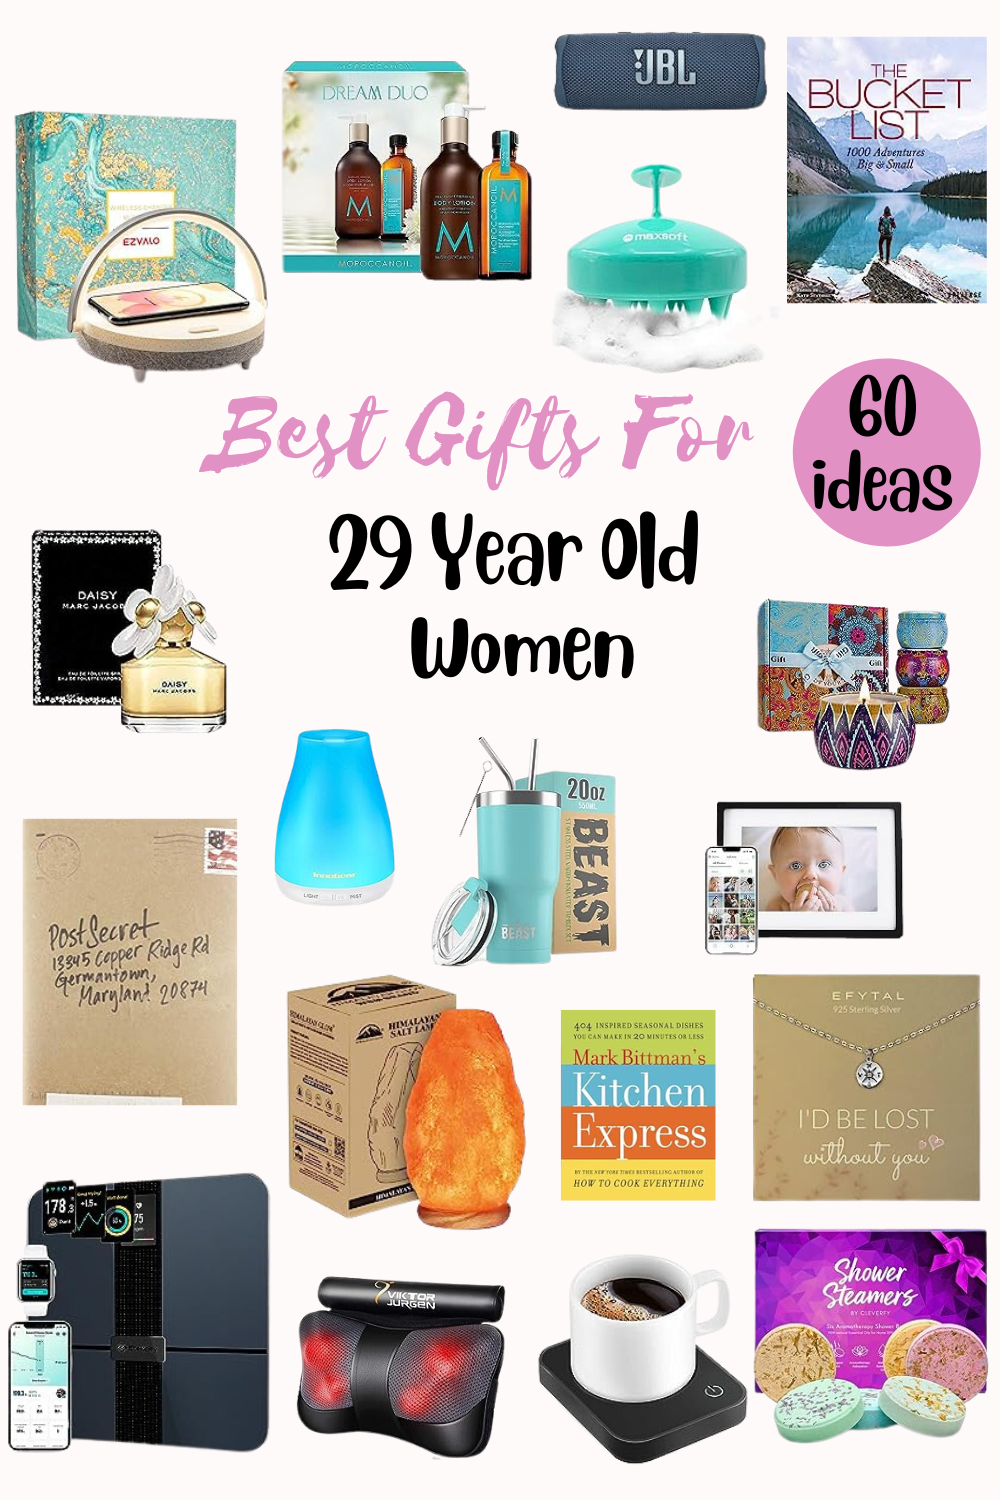 88 Of The Best Gifts For Women That She's Sure To Love | British Vogue-sonthuy.vn